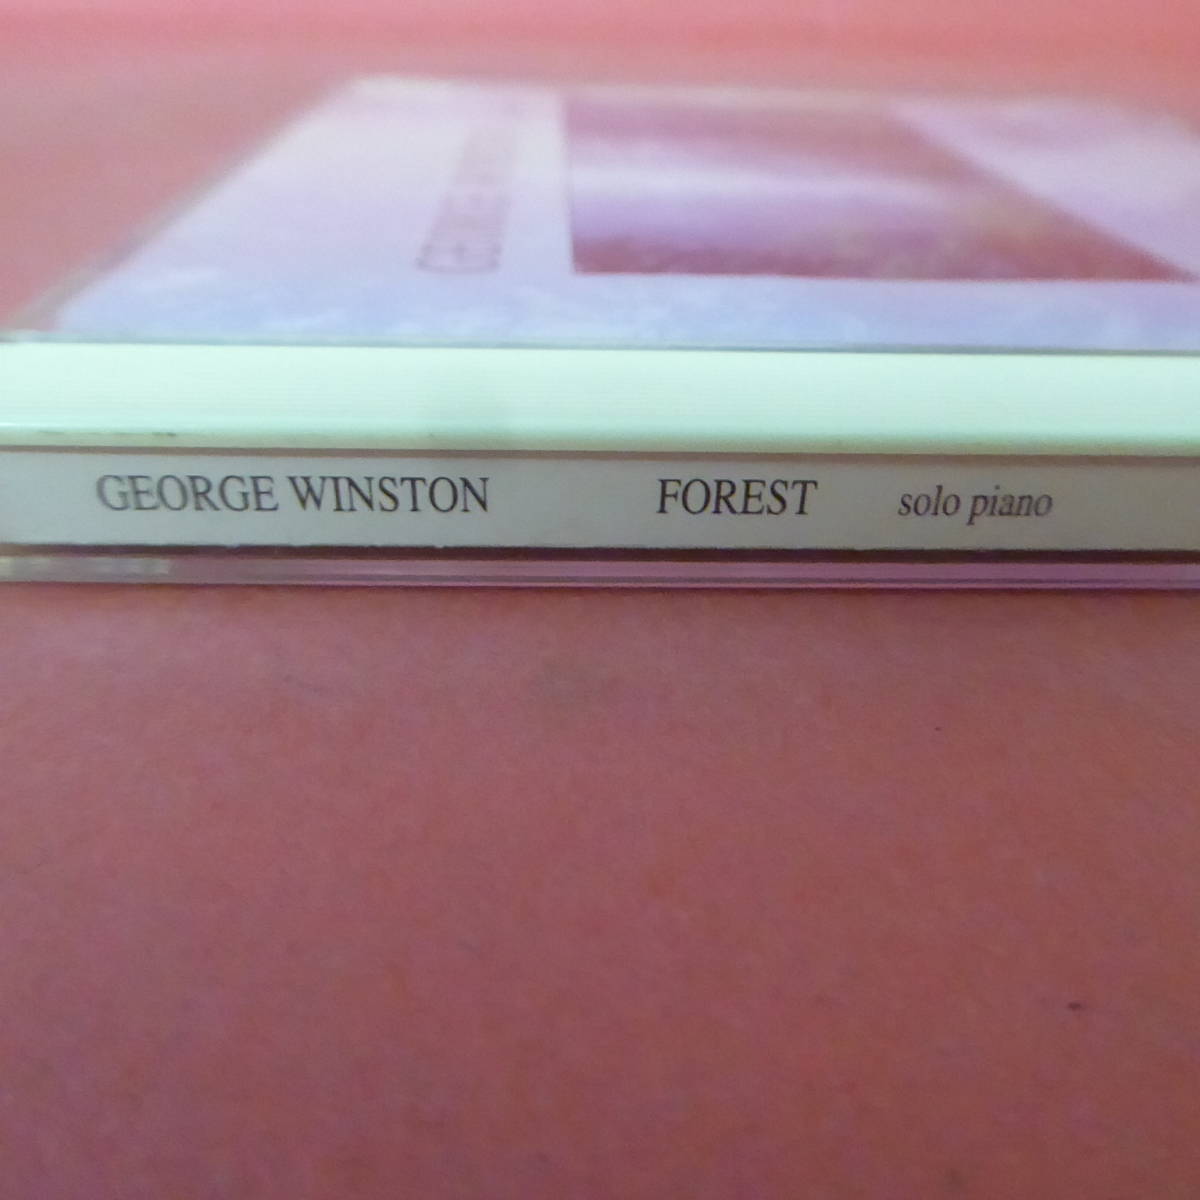 CD1-231108☆GEORGE WINSTON FOREST solo piano CD ジョージ・ウィンストン の画像4